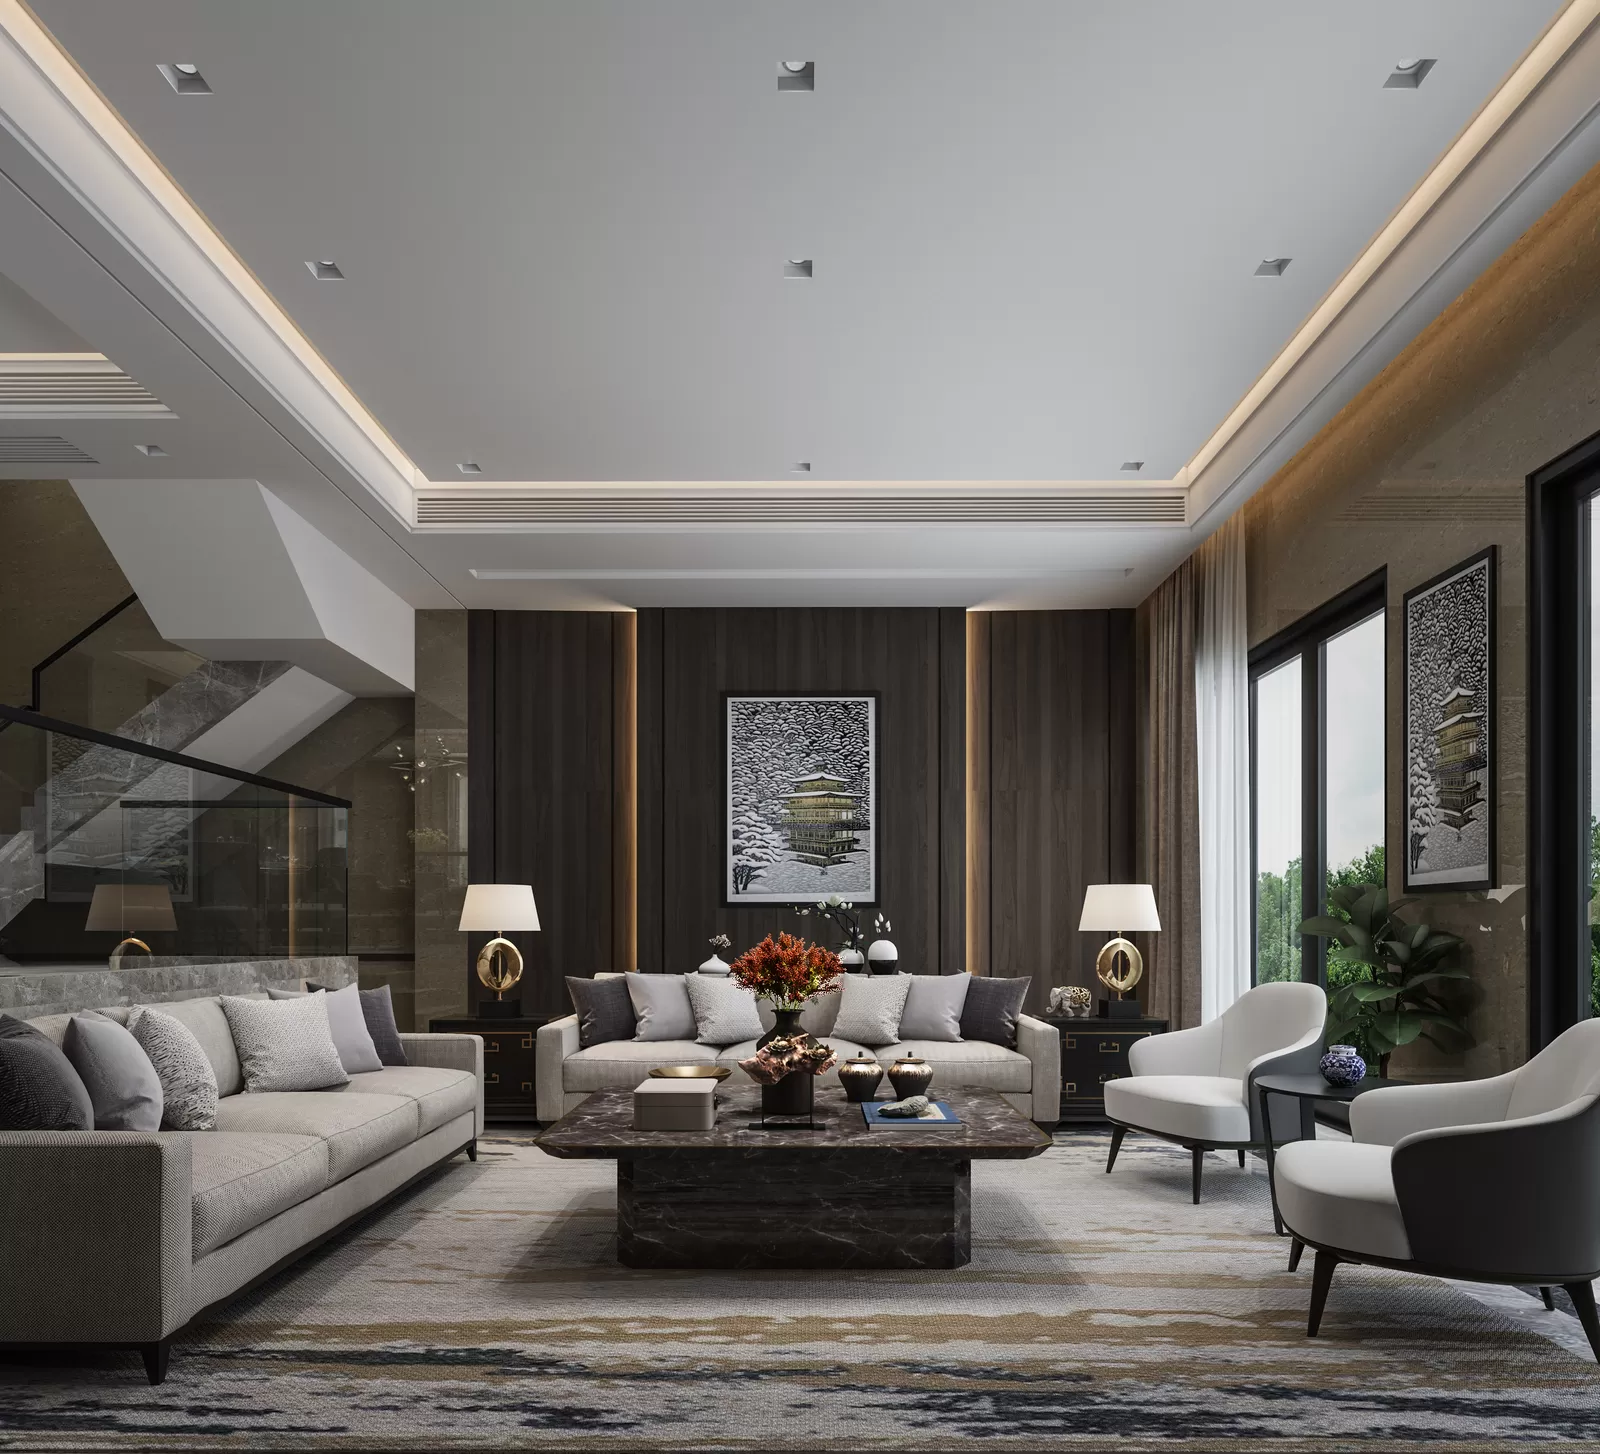 DESMOD INTERIOR 2021 (VRAY) – 4. LIVING ROOM – CHINESE – 85